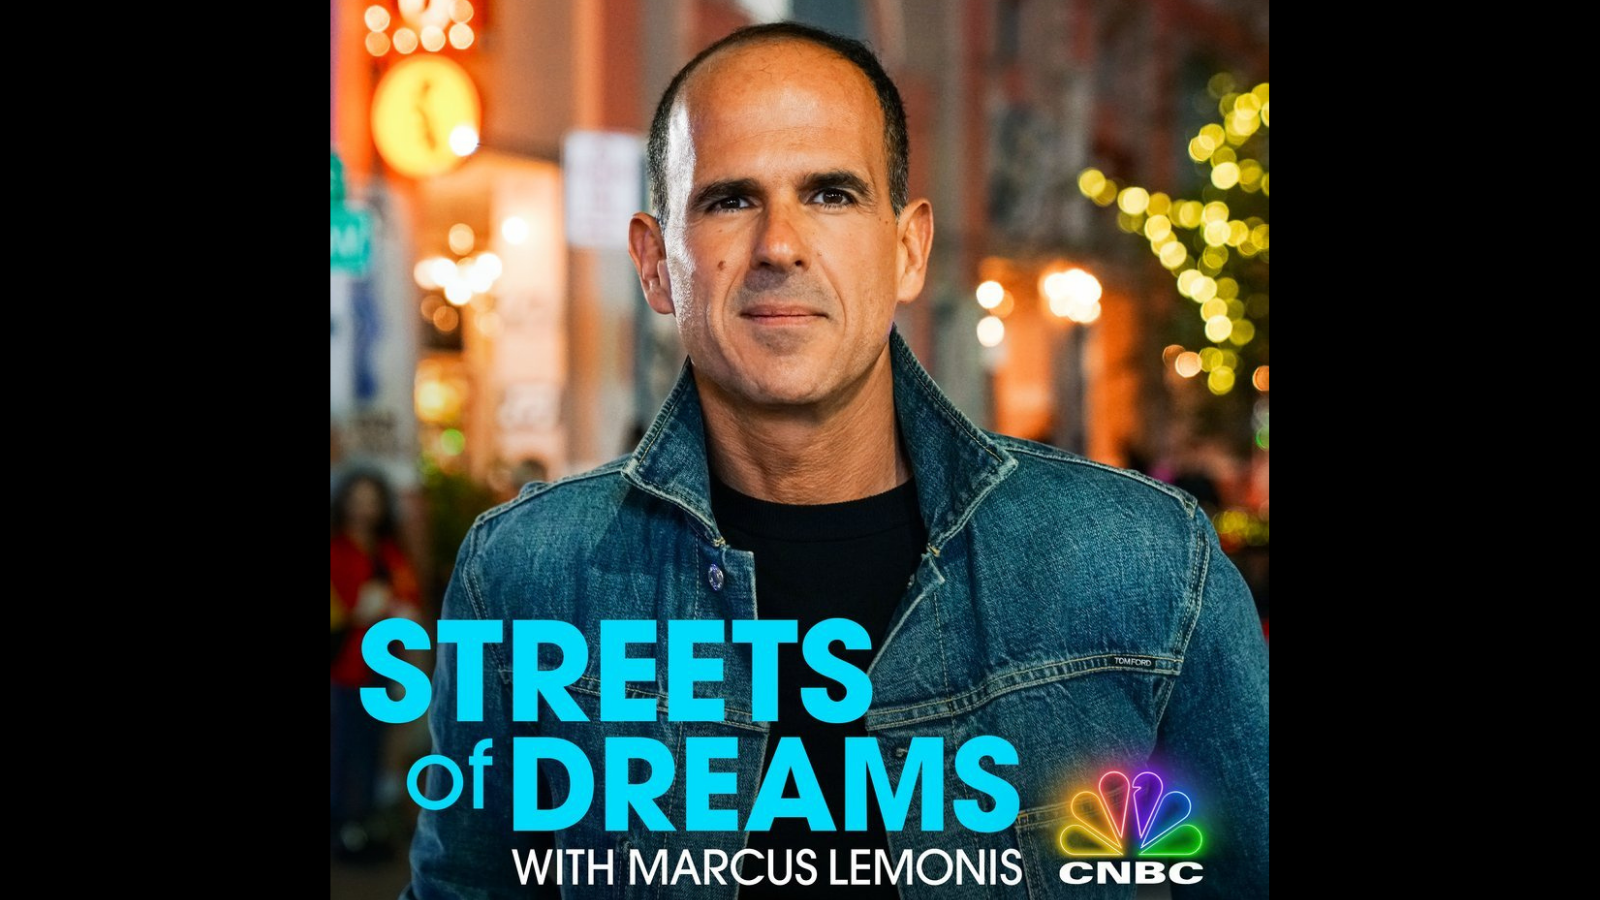 'Streets of Dreams' Explores the Most Influential Streets in the USA ⋆